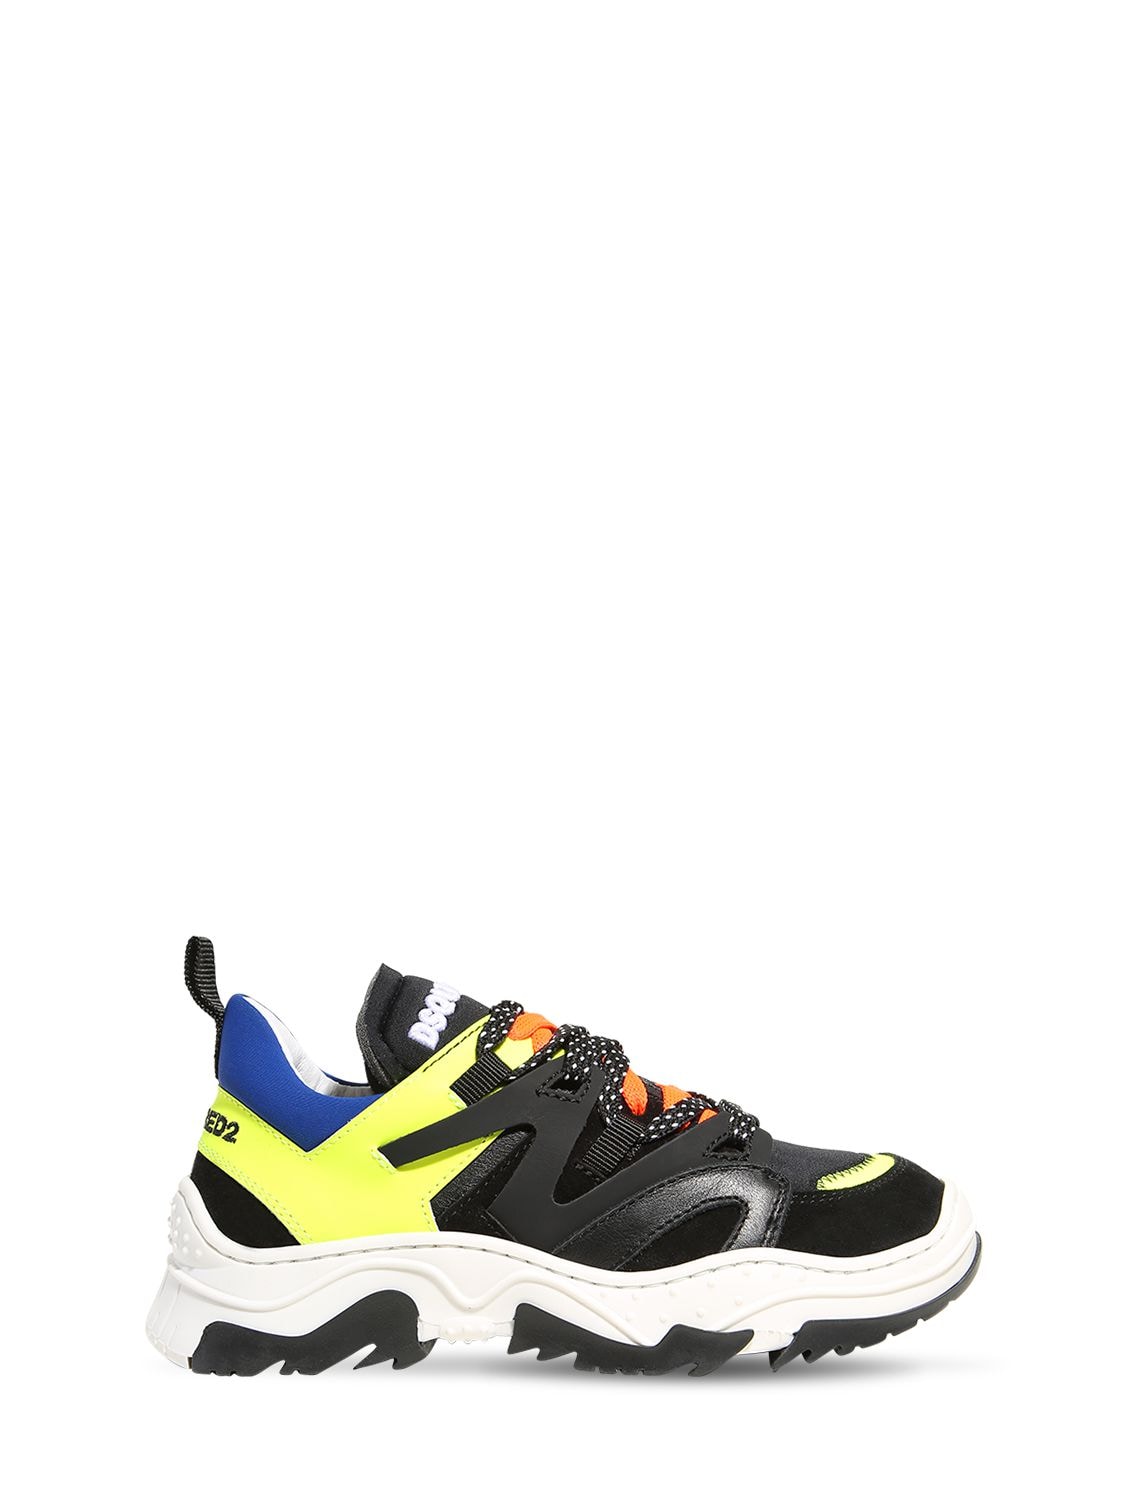 Neoprene & Leather Lace-up Sneakers